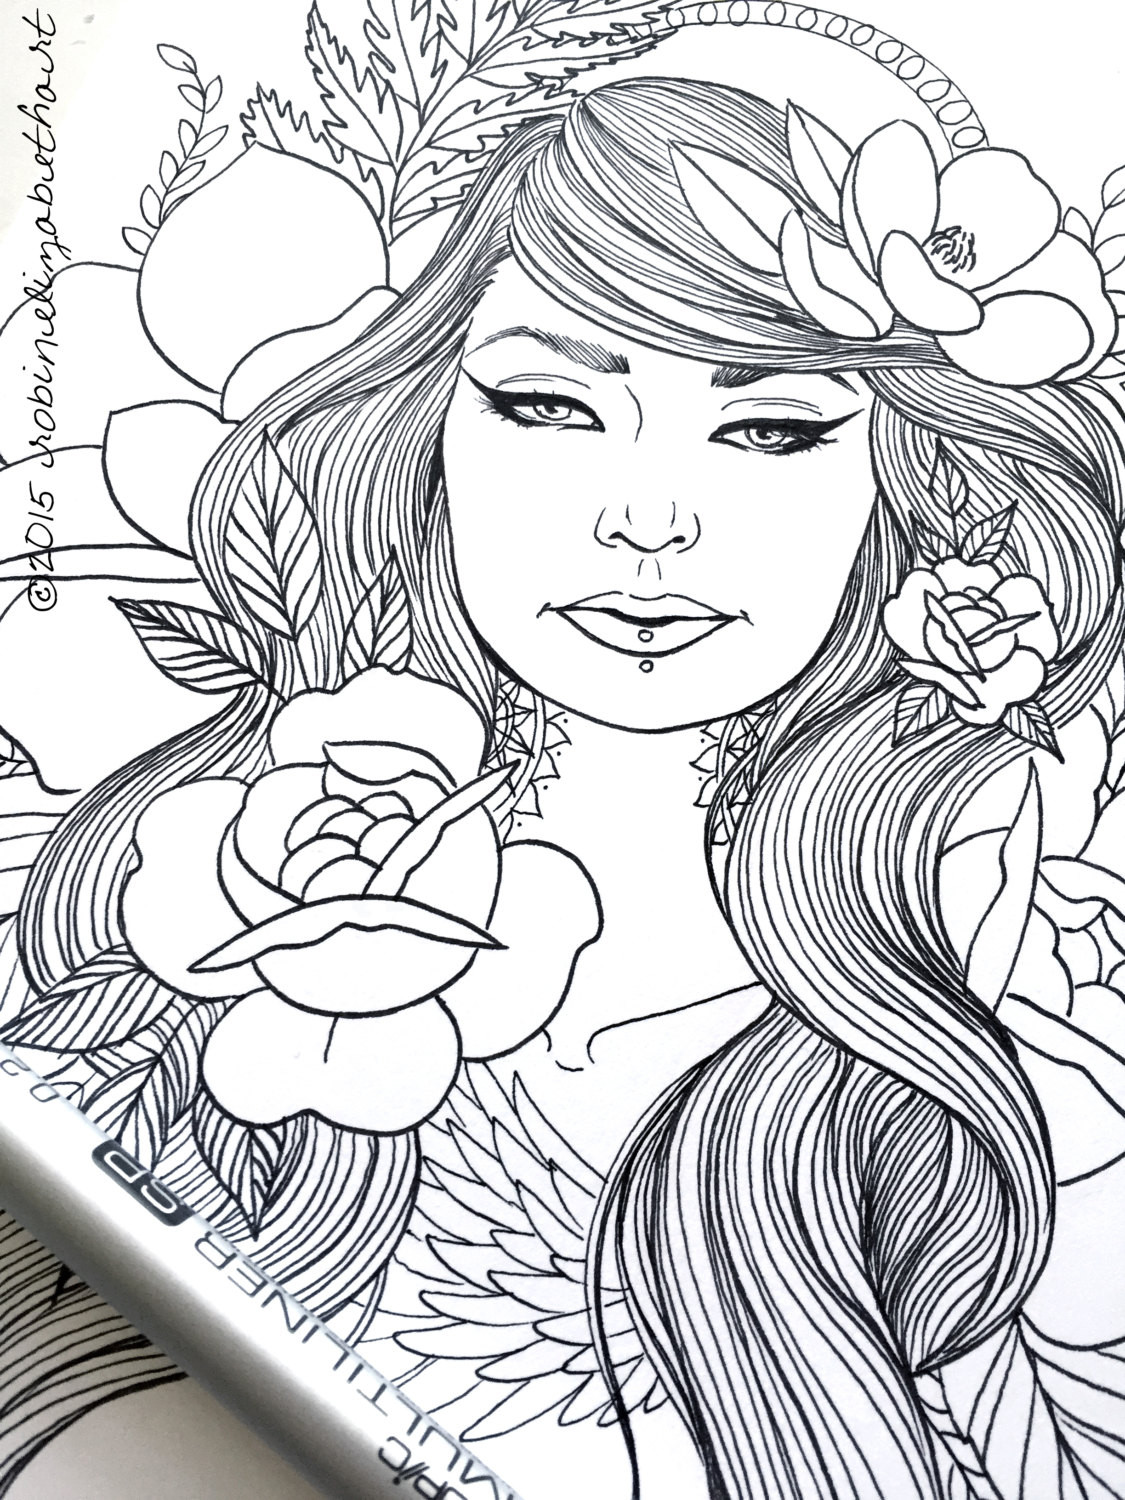 Coloring Pages For Adult Girls
 Girls with Tattoos Pack Adult Coloring Pages Magnolias